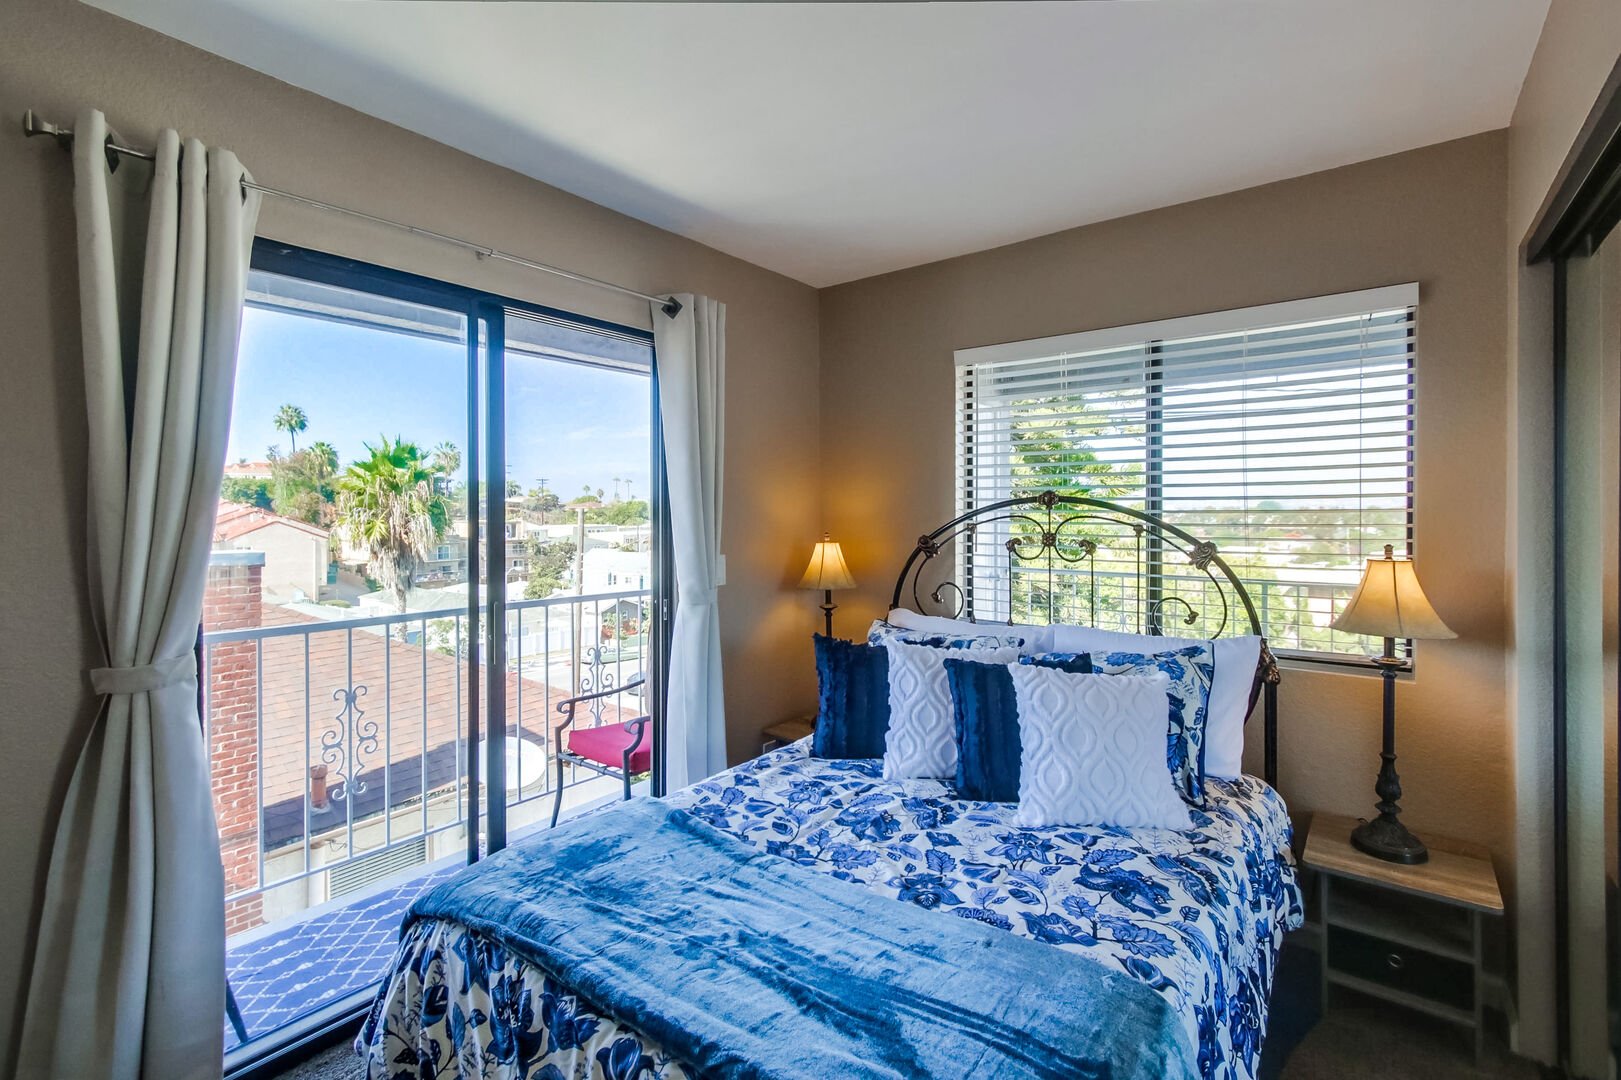 Guest bedroom with full size bed, private patio, ample natural light and closet and dresser storage